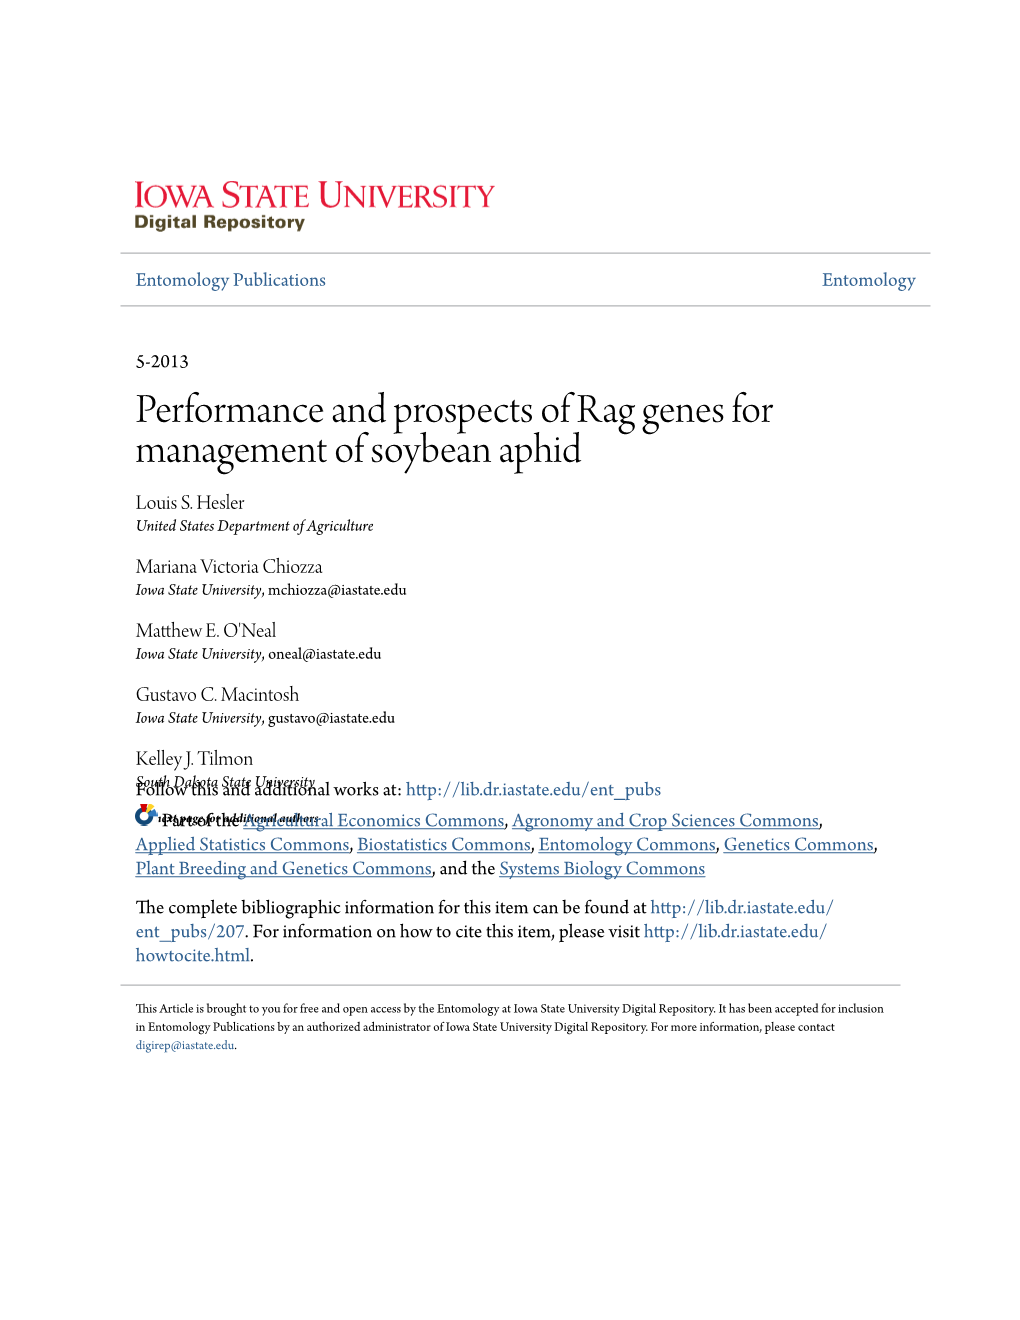 Performance and Prospects of Rag Genes for Management of Soybean Aphid Louis S